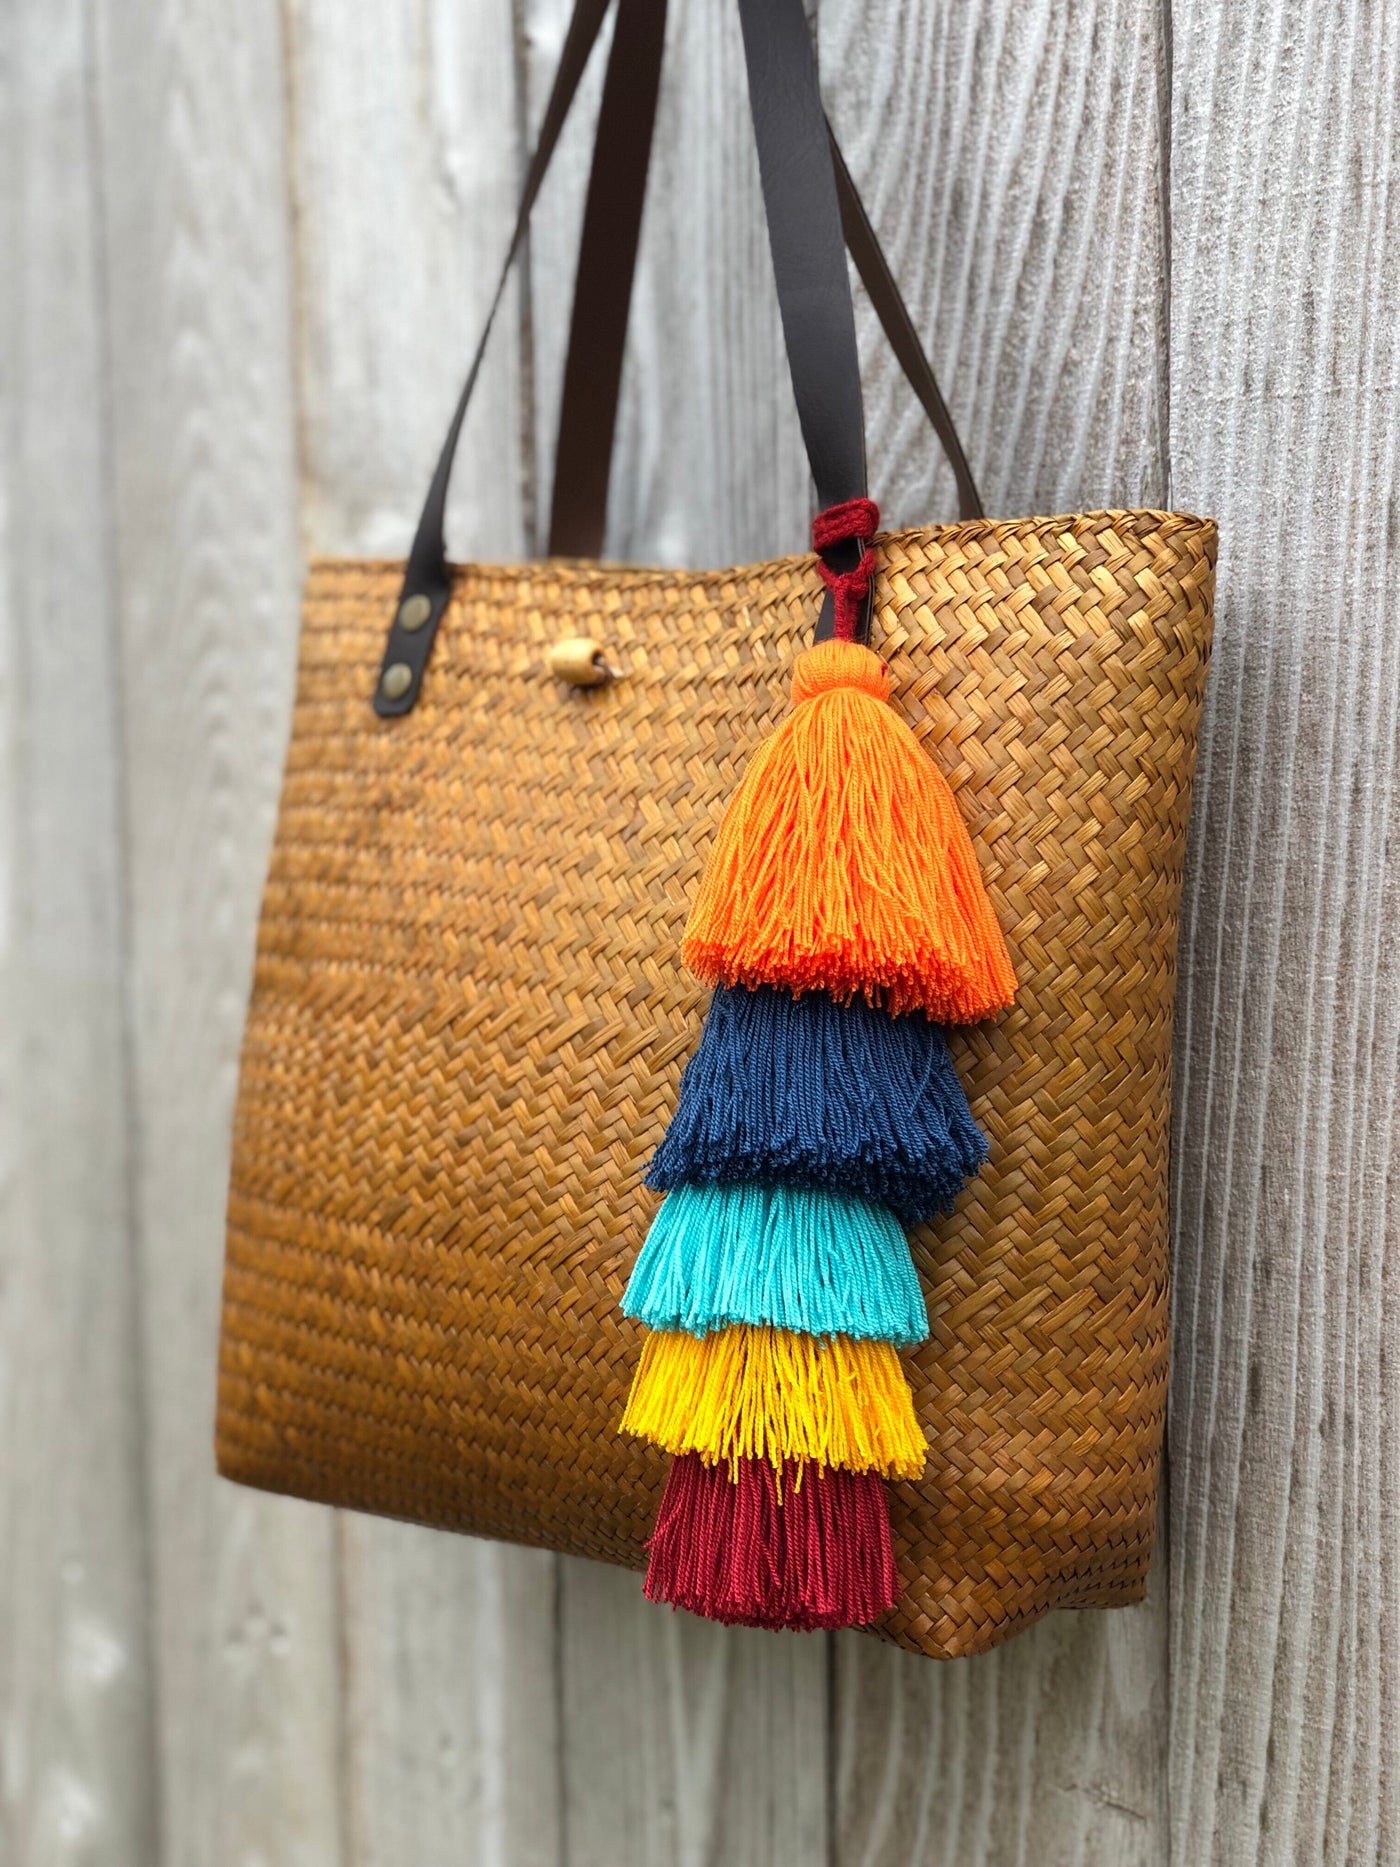 Colorful Tassel Tote-Bag Charms -Large Straw Bag Tassel Charm Tassel Bag Charm CUSTOM (5Tassels) - 6week preorder (any color) 